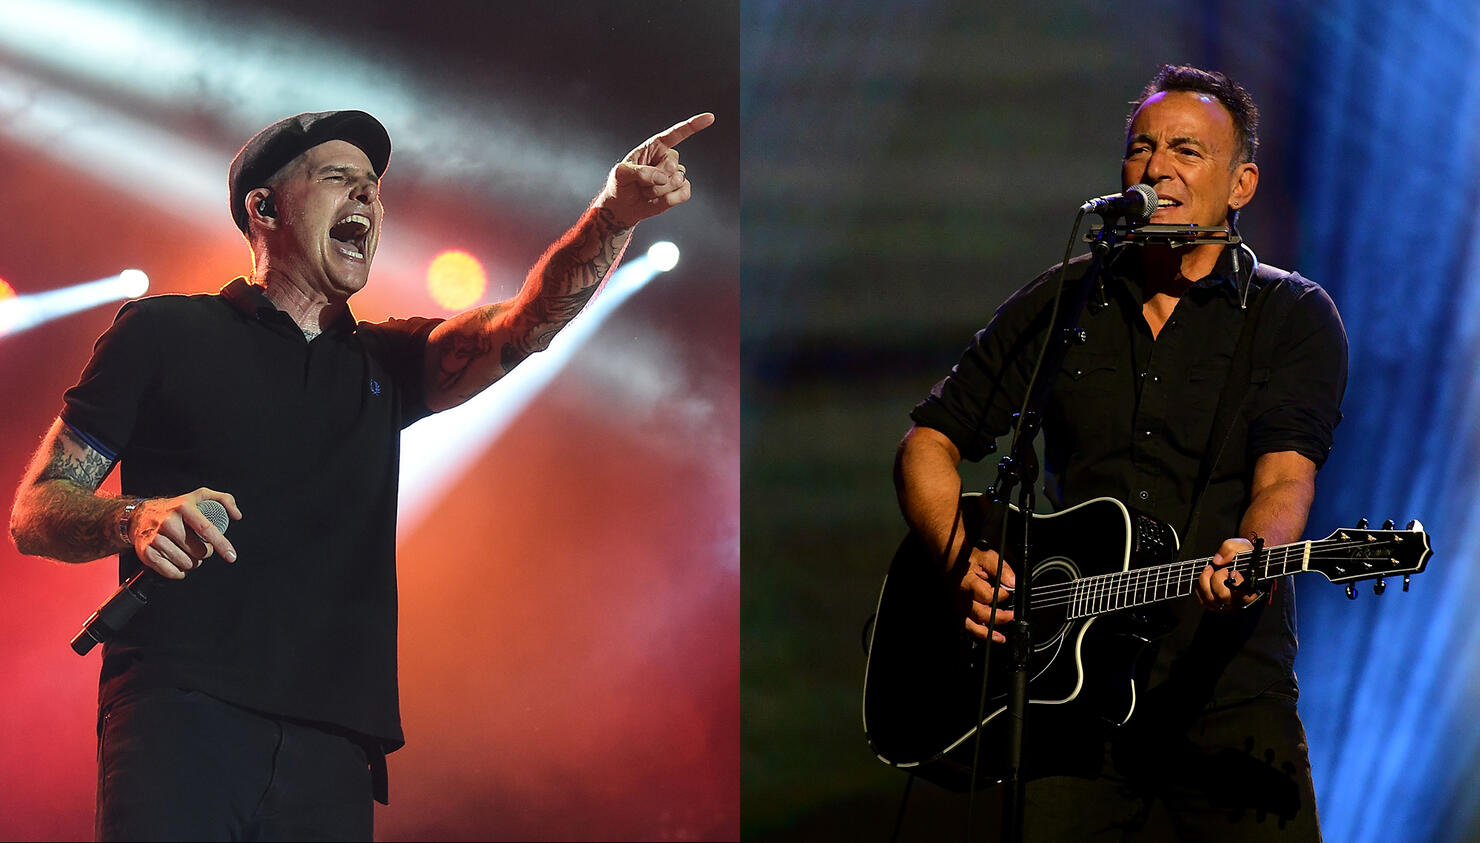 Dropkick Murphys to stage live streamed gig with Bruce Springsteen